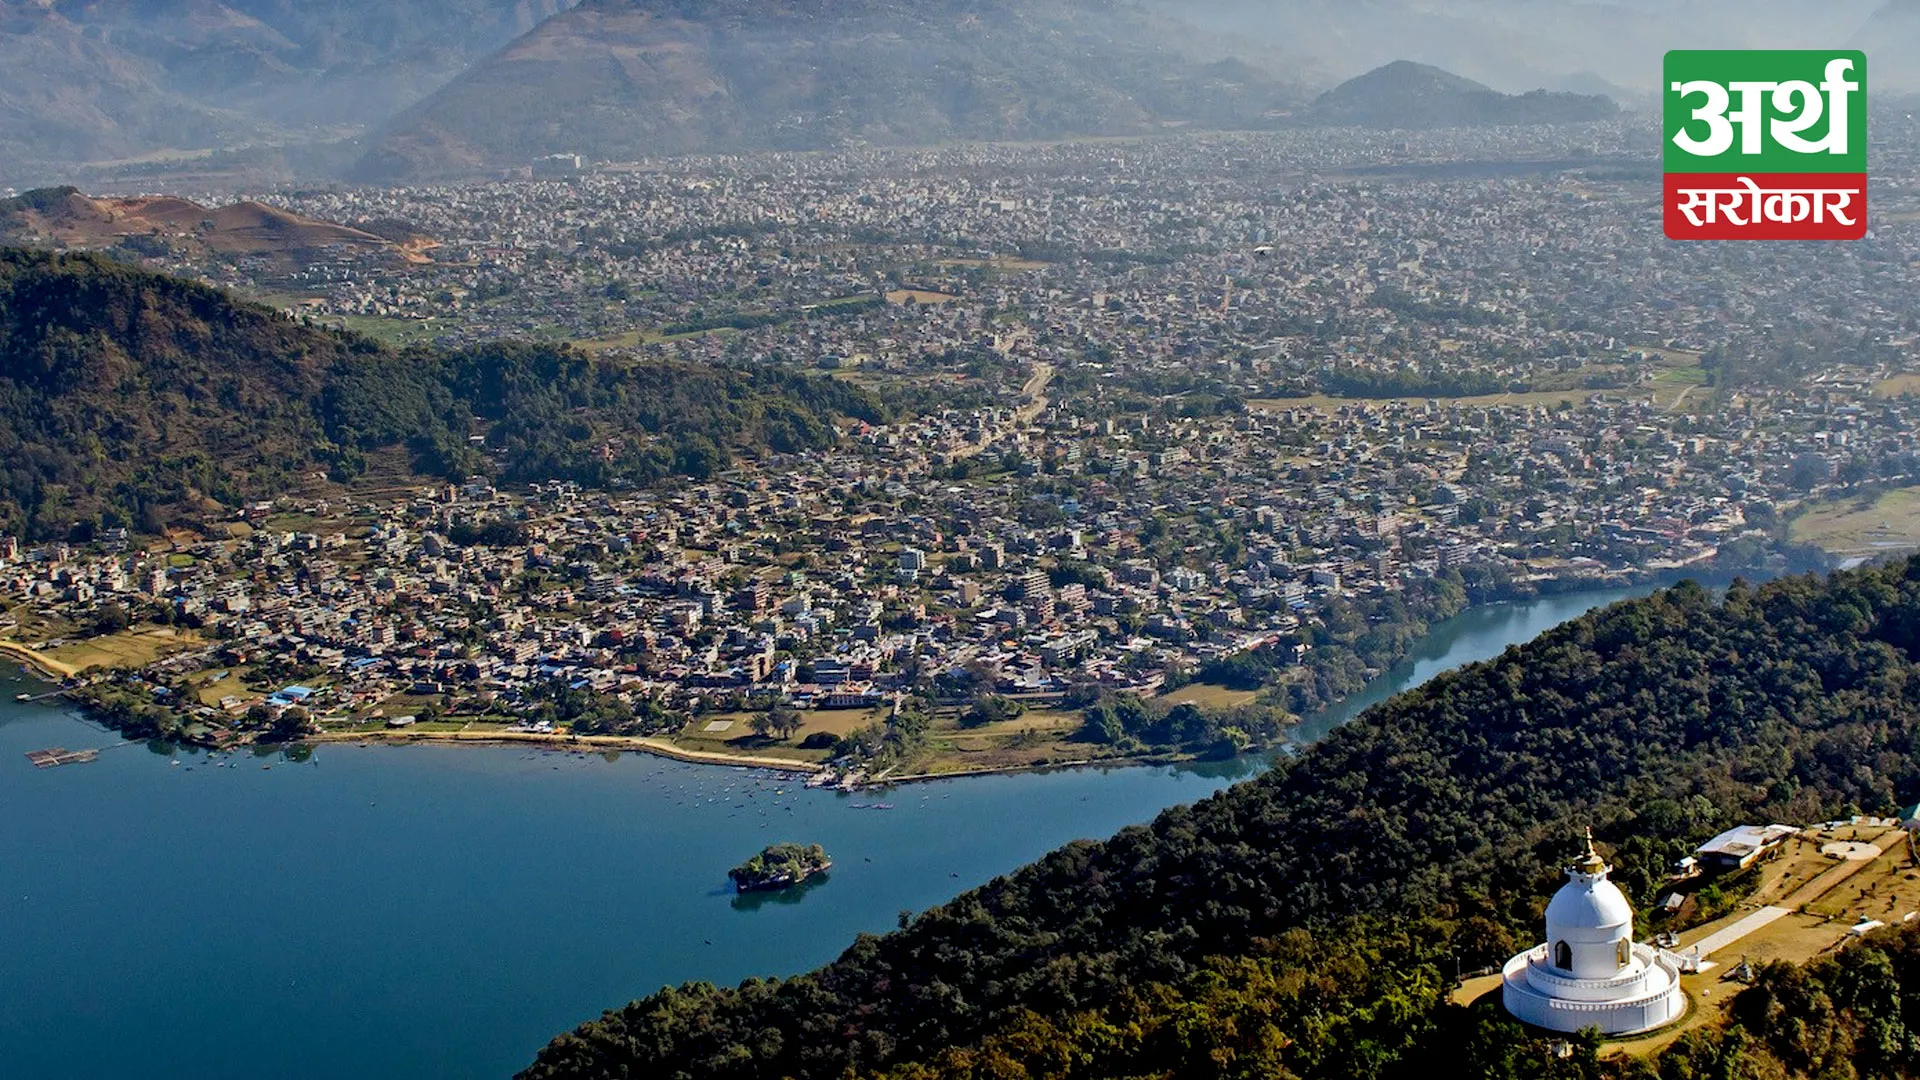 Pokhara to be declared a ‘tourism capital’